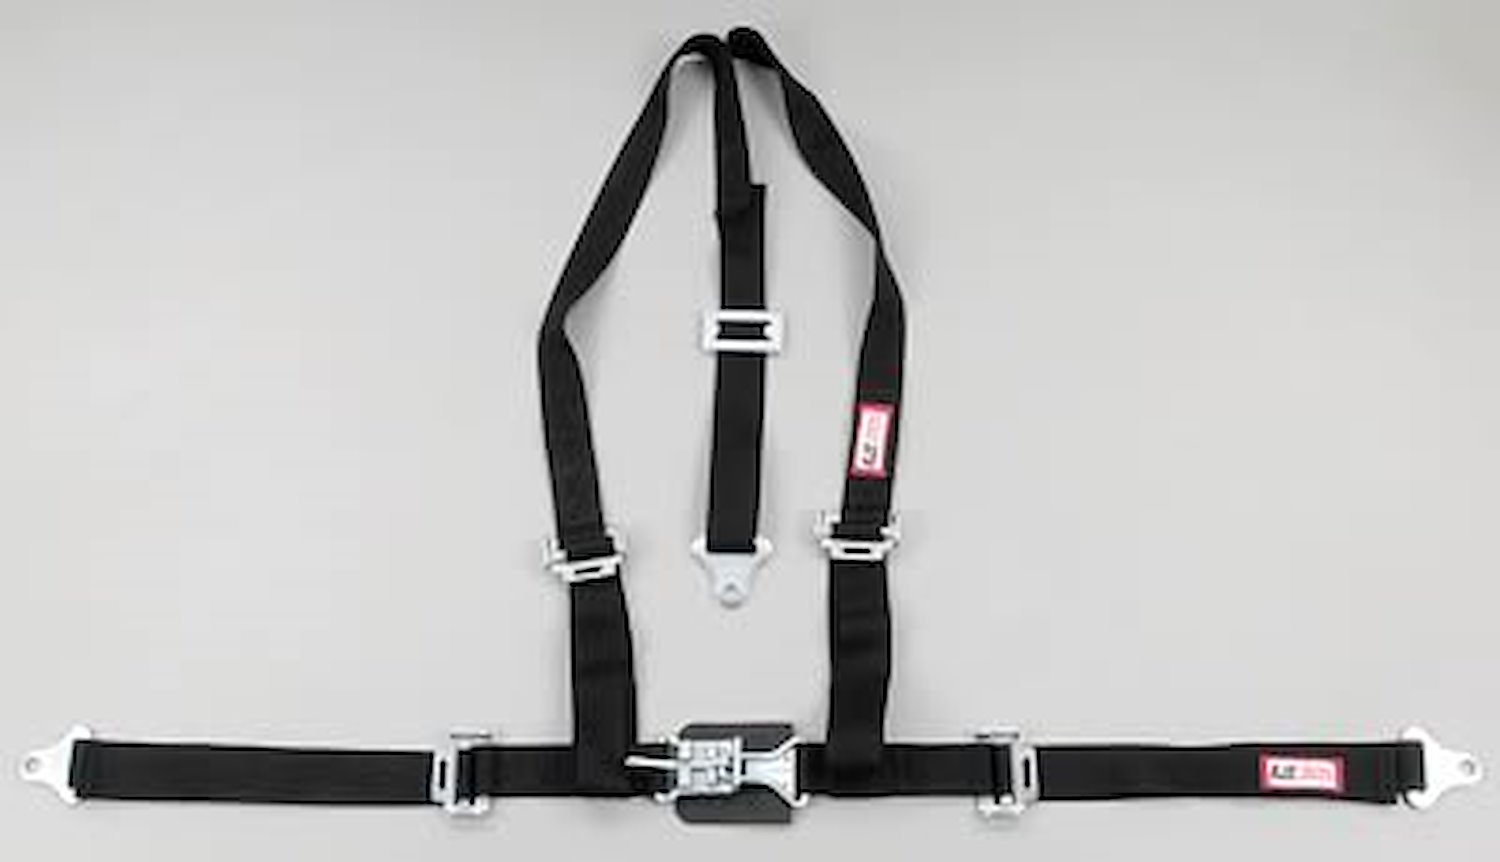 NON-SFI L&L HARNESS 2 PULL UP Lap Belt SEWN IN 2 S.H. Y FLOOR Mount w/STERNUM STRAP ALL WRAP ENDS GRAY